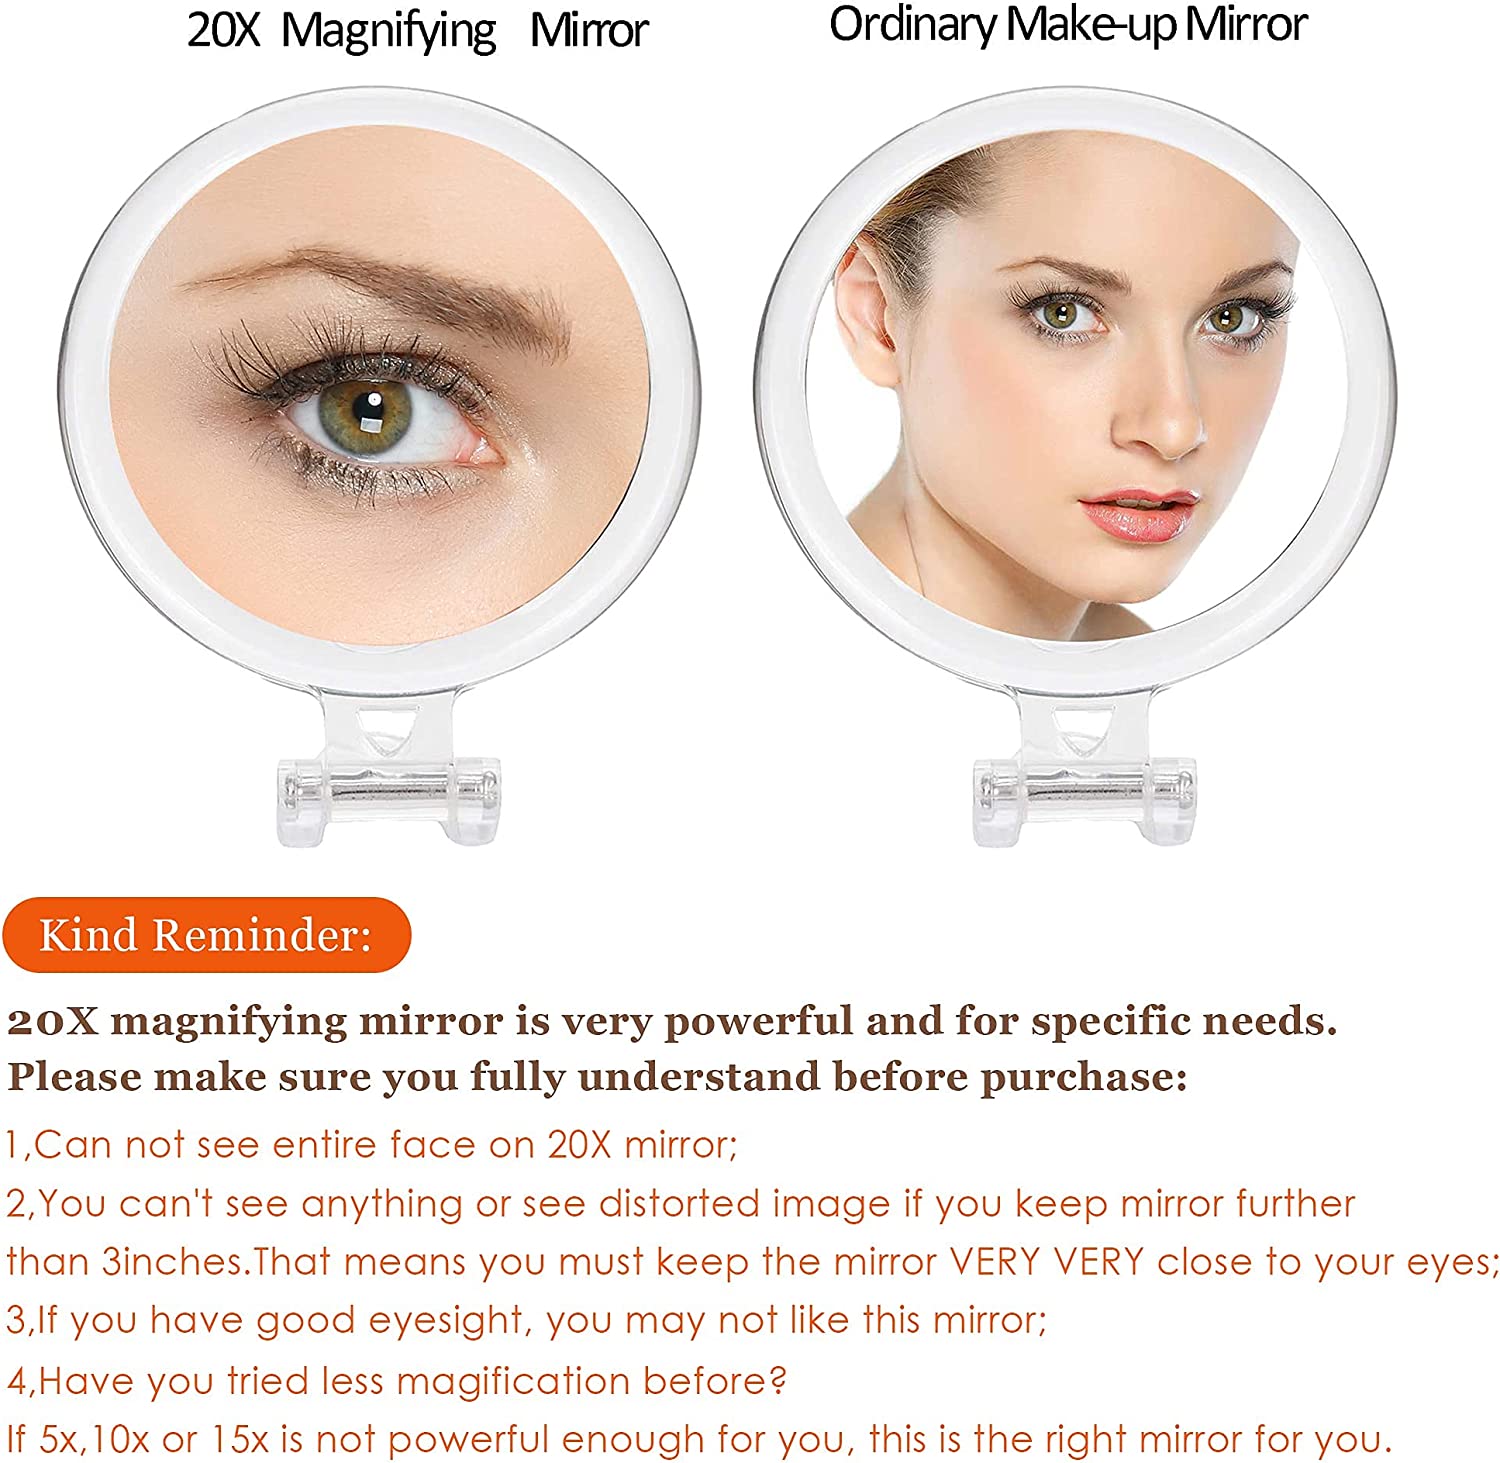 20X Magnifying Mirror, 6 Inch, Two Sided Hand Mirror, 20X/1X Magnification, Folding Makeup Mirror with Handheld/Stand, Use for Makeup Application, Tweezing, and Blackhead/Blemish Removal.